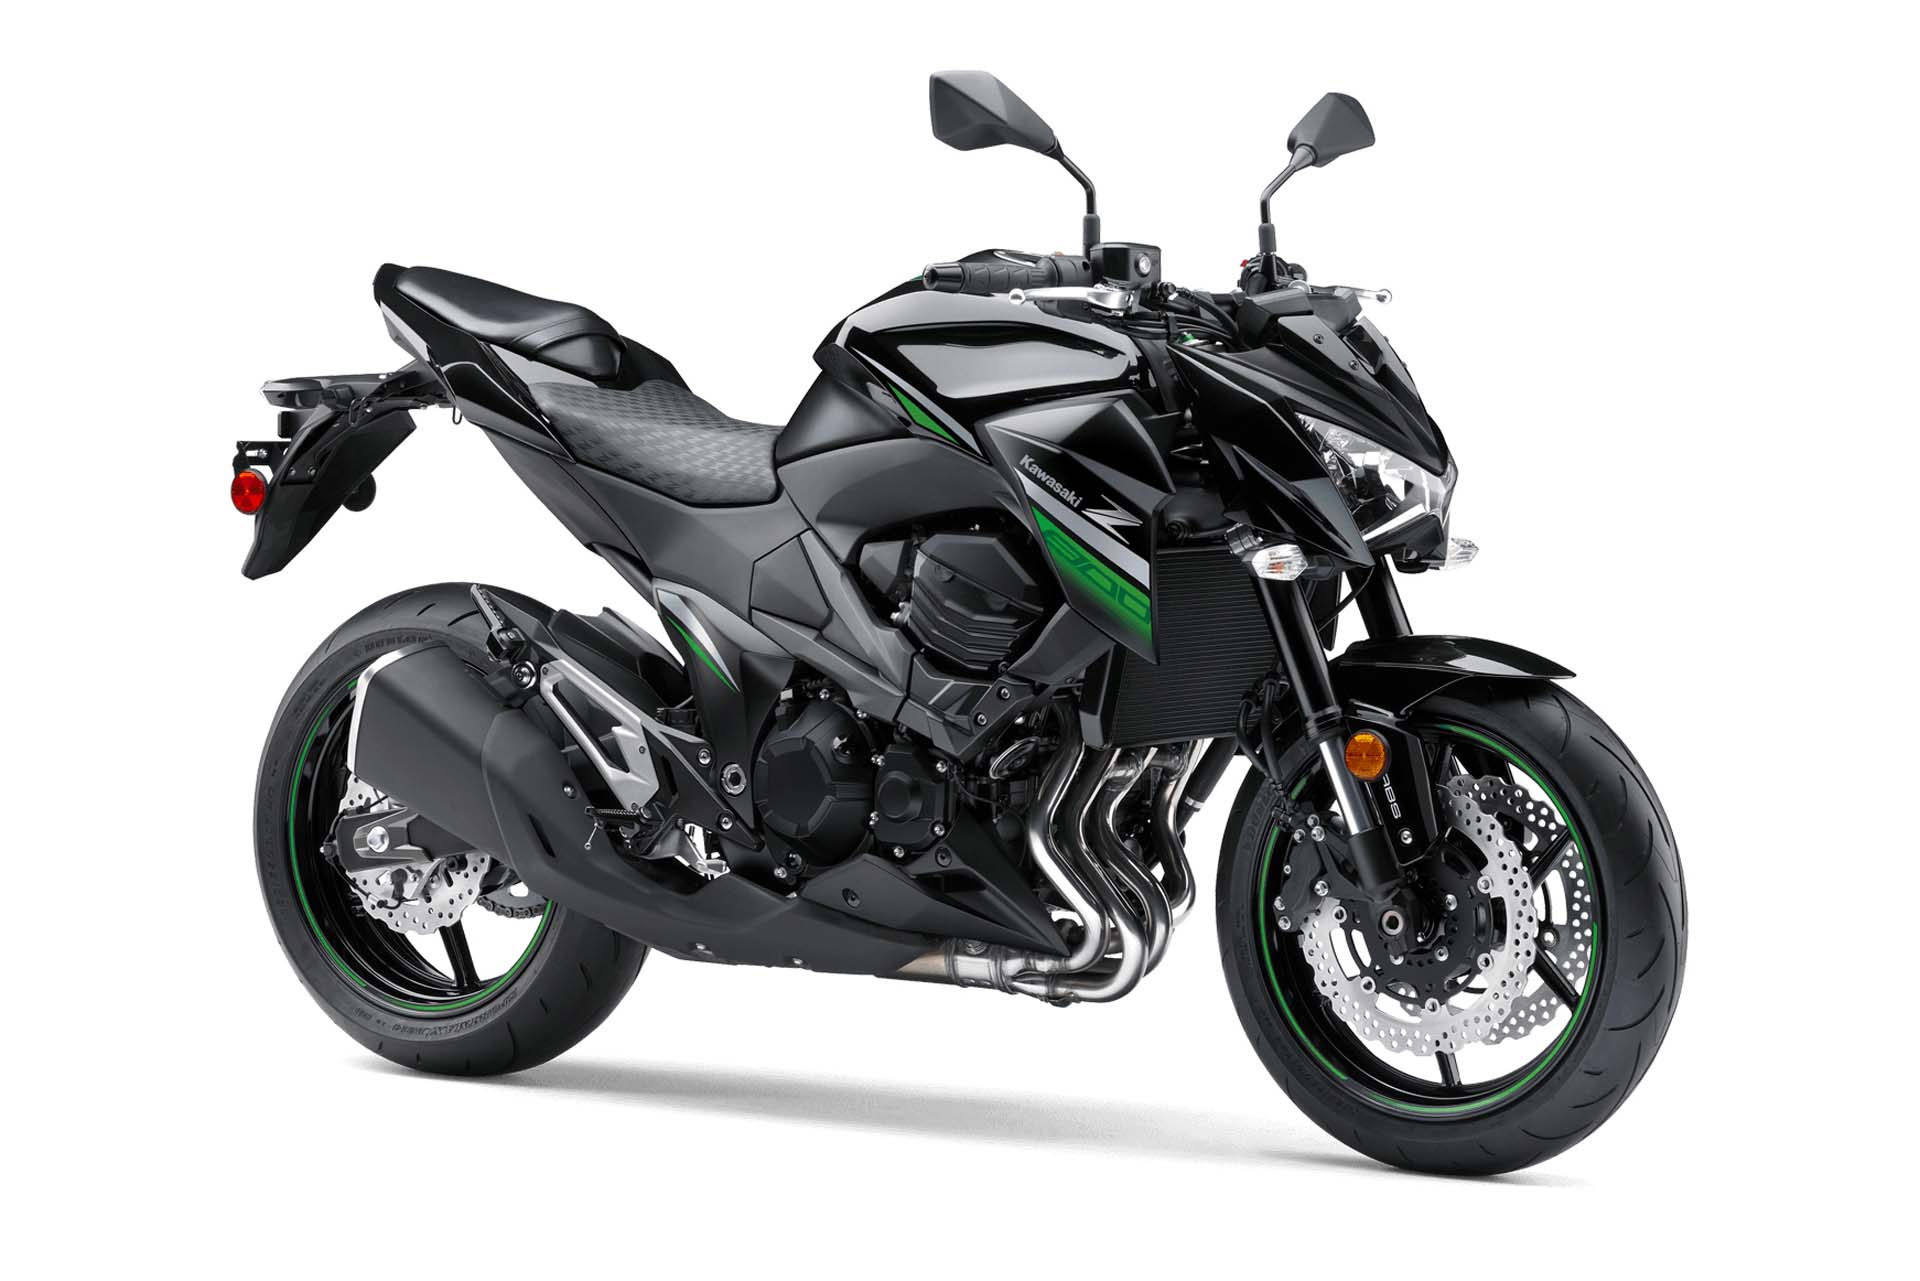 The latest Japanese make to bring a naked sport bike to North America, Kawasaki gives us the Z800, well priced, well powered and just plain good looking. Standard luggage hooks, low flat handlebars and a punchy 806 cc engine make this an entertaining commuter bike.